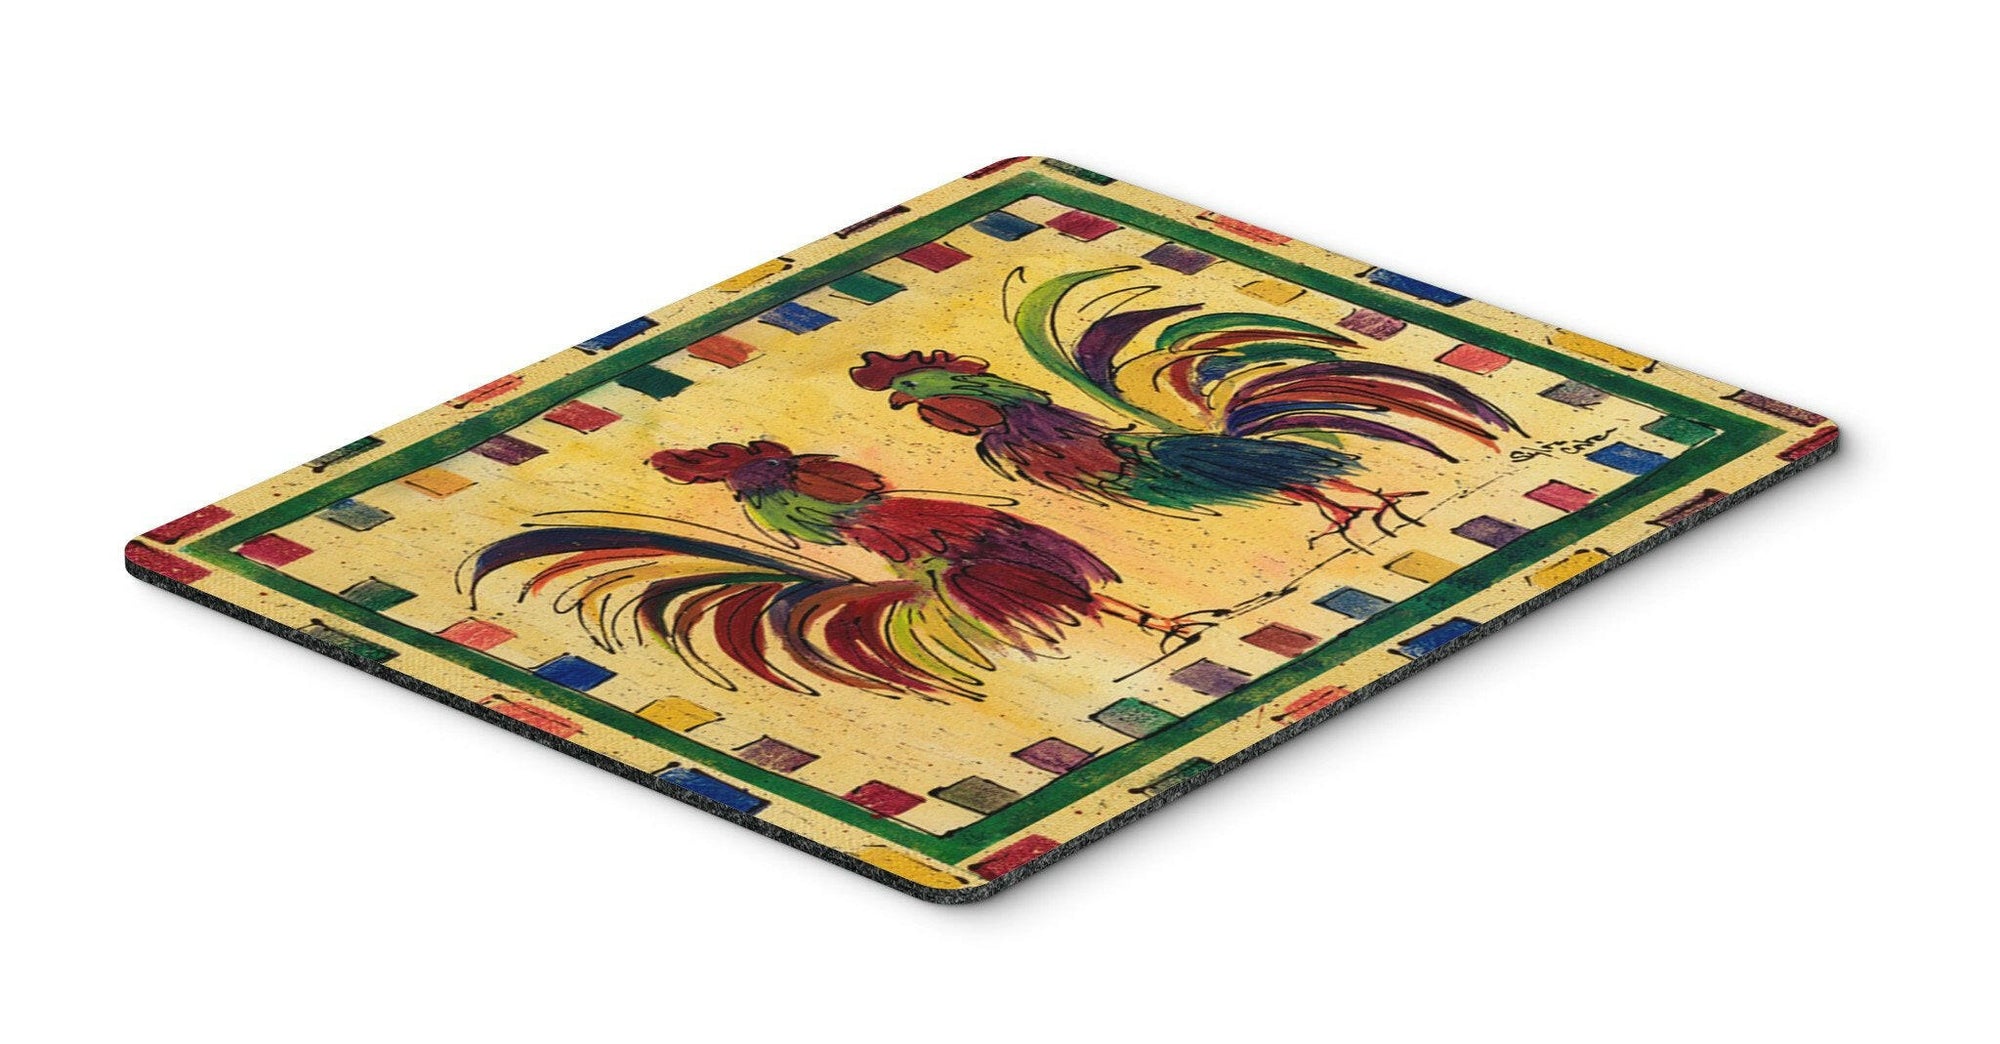 Bird - Rooster Mouse pad, hot pad, or trivet by Caroline's Treasures